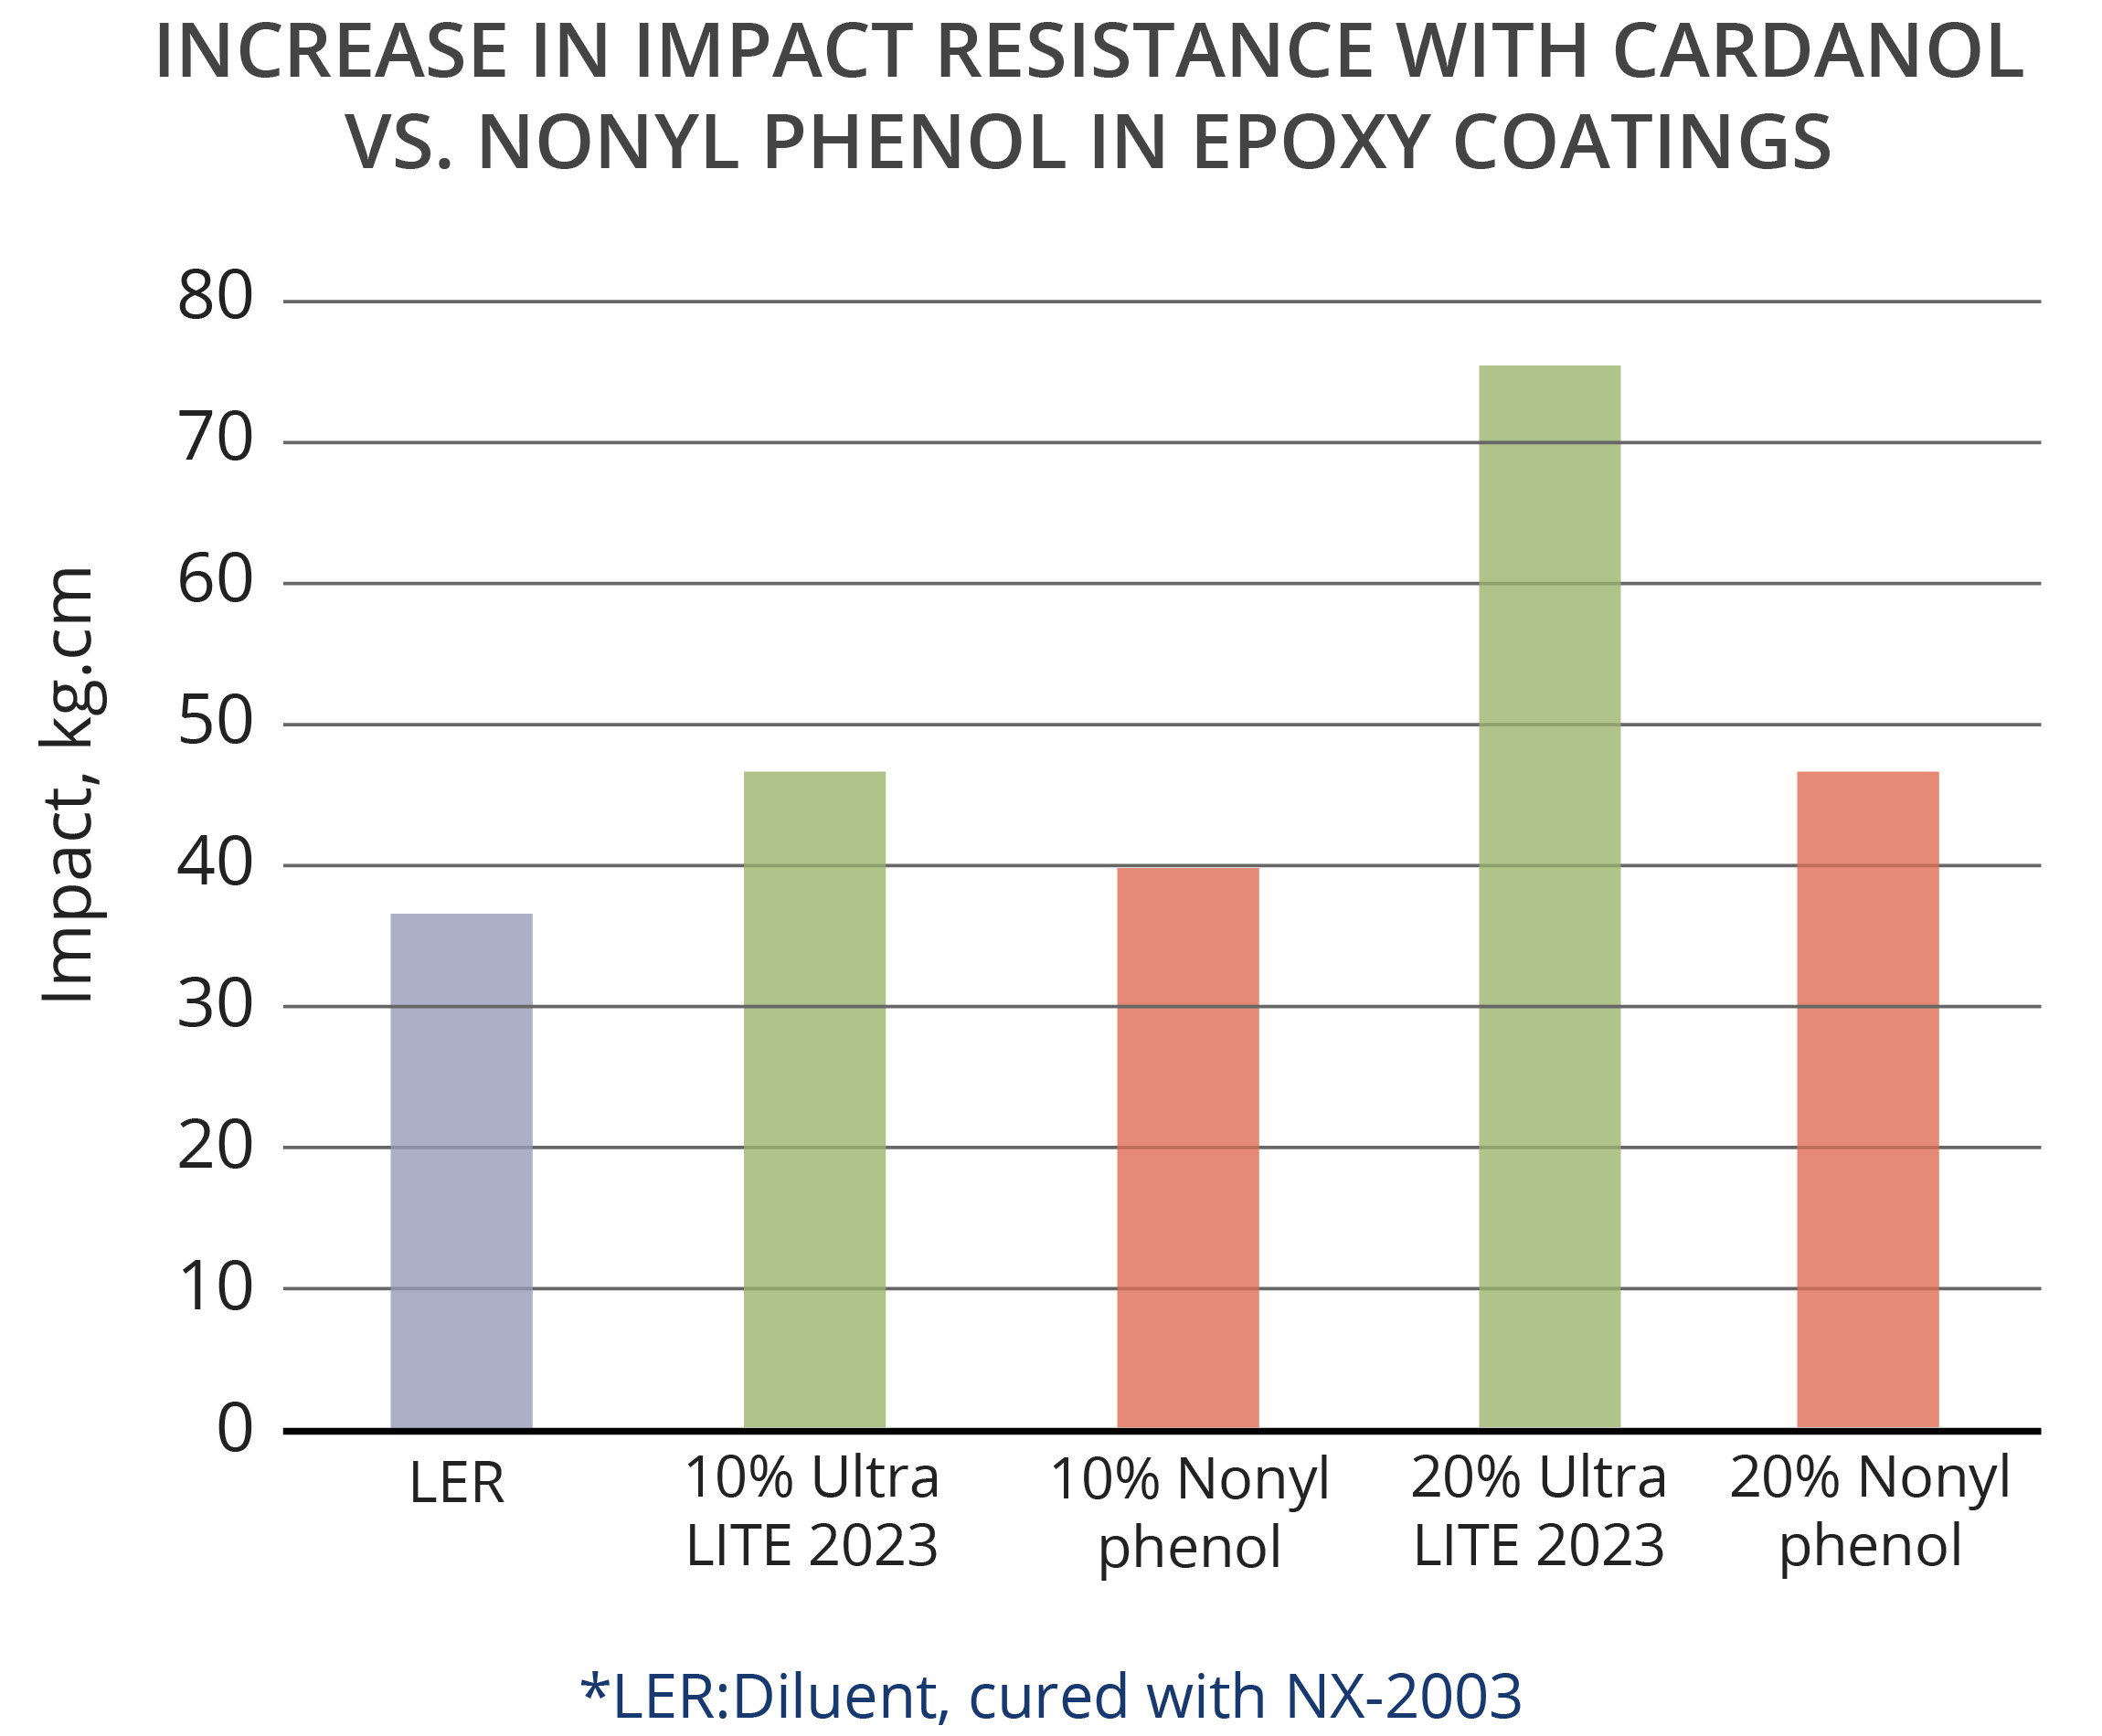 cardanol can increase impact resistance of epoxy systems as replacement of nonyl phenol